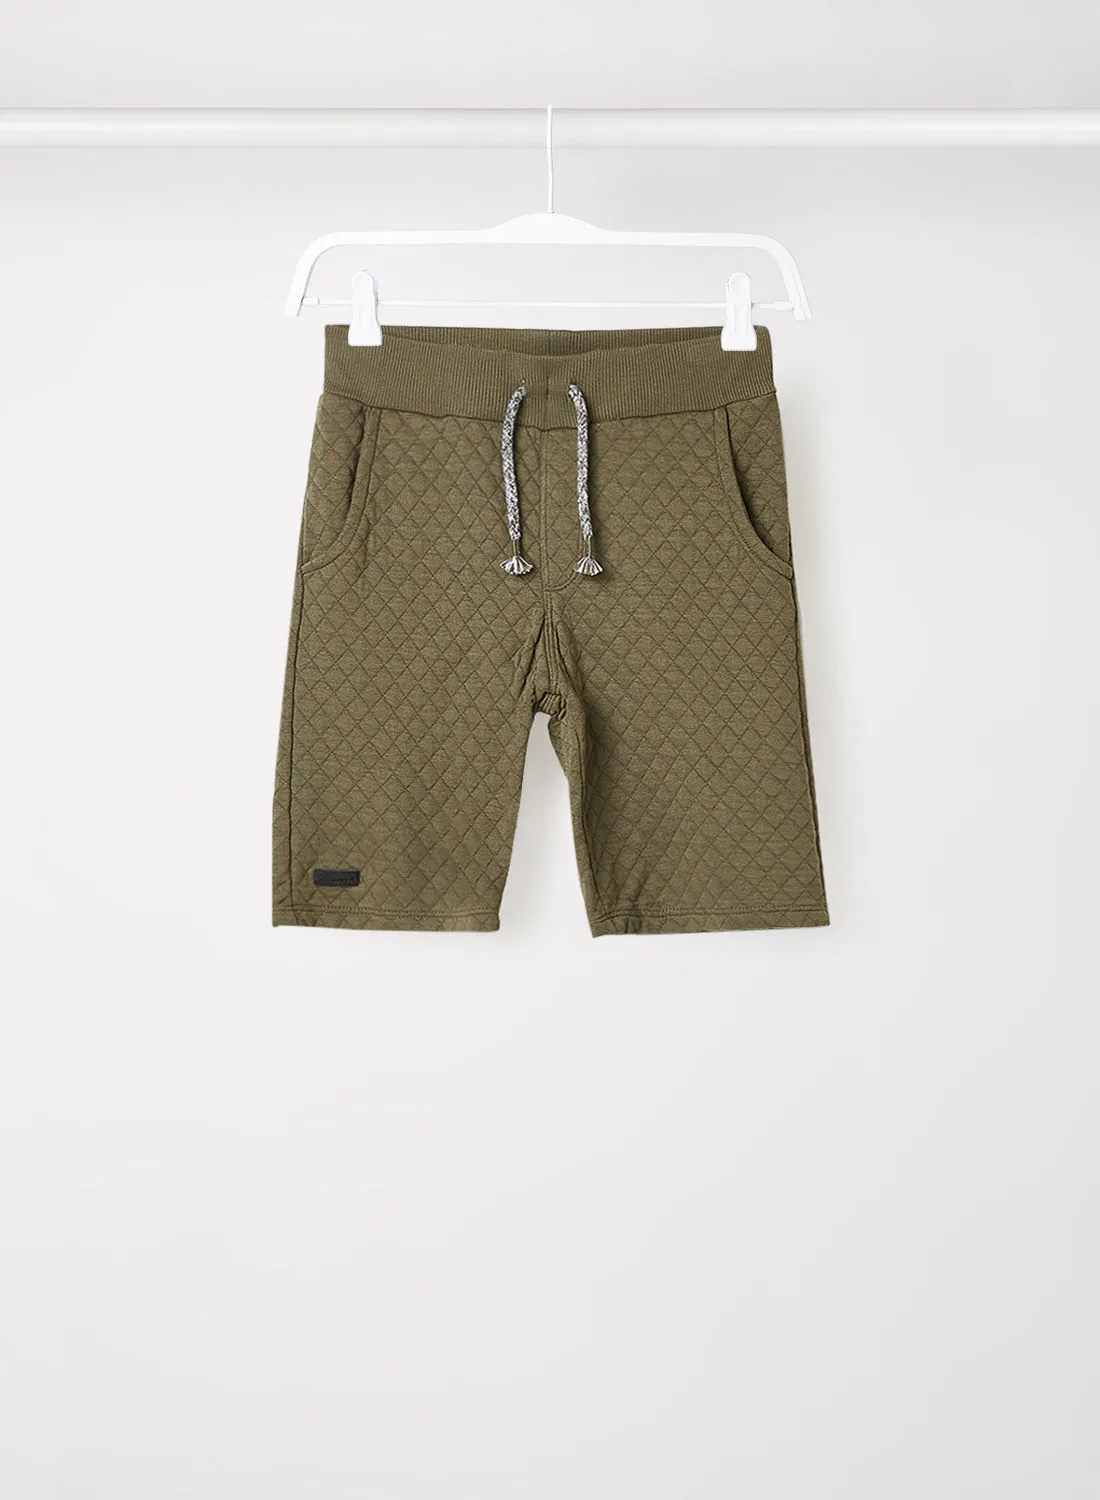 NAME IT Kids/Teen Quilted Sweat Shorts Green